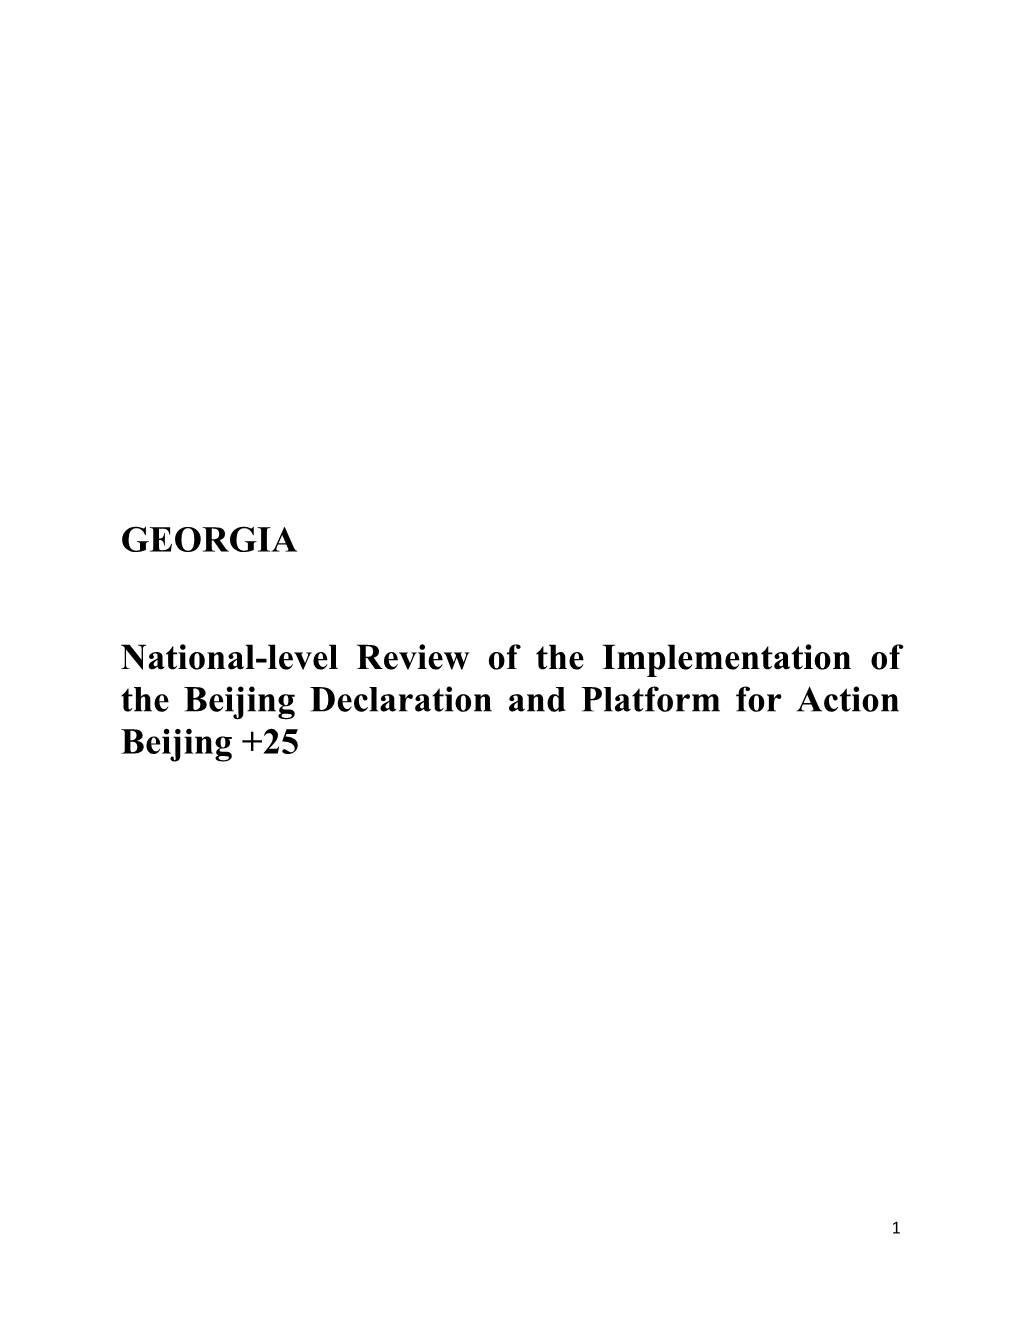 GEORGIA National-Level Review of the Implementation of the Beijing Declaration and Platform for Action Beijing